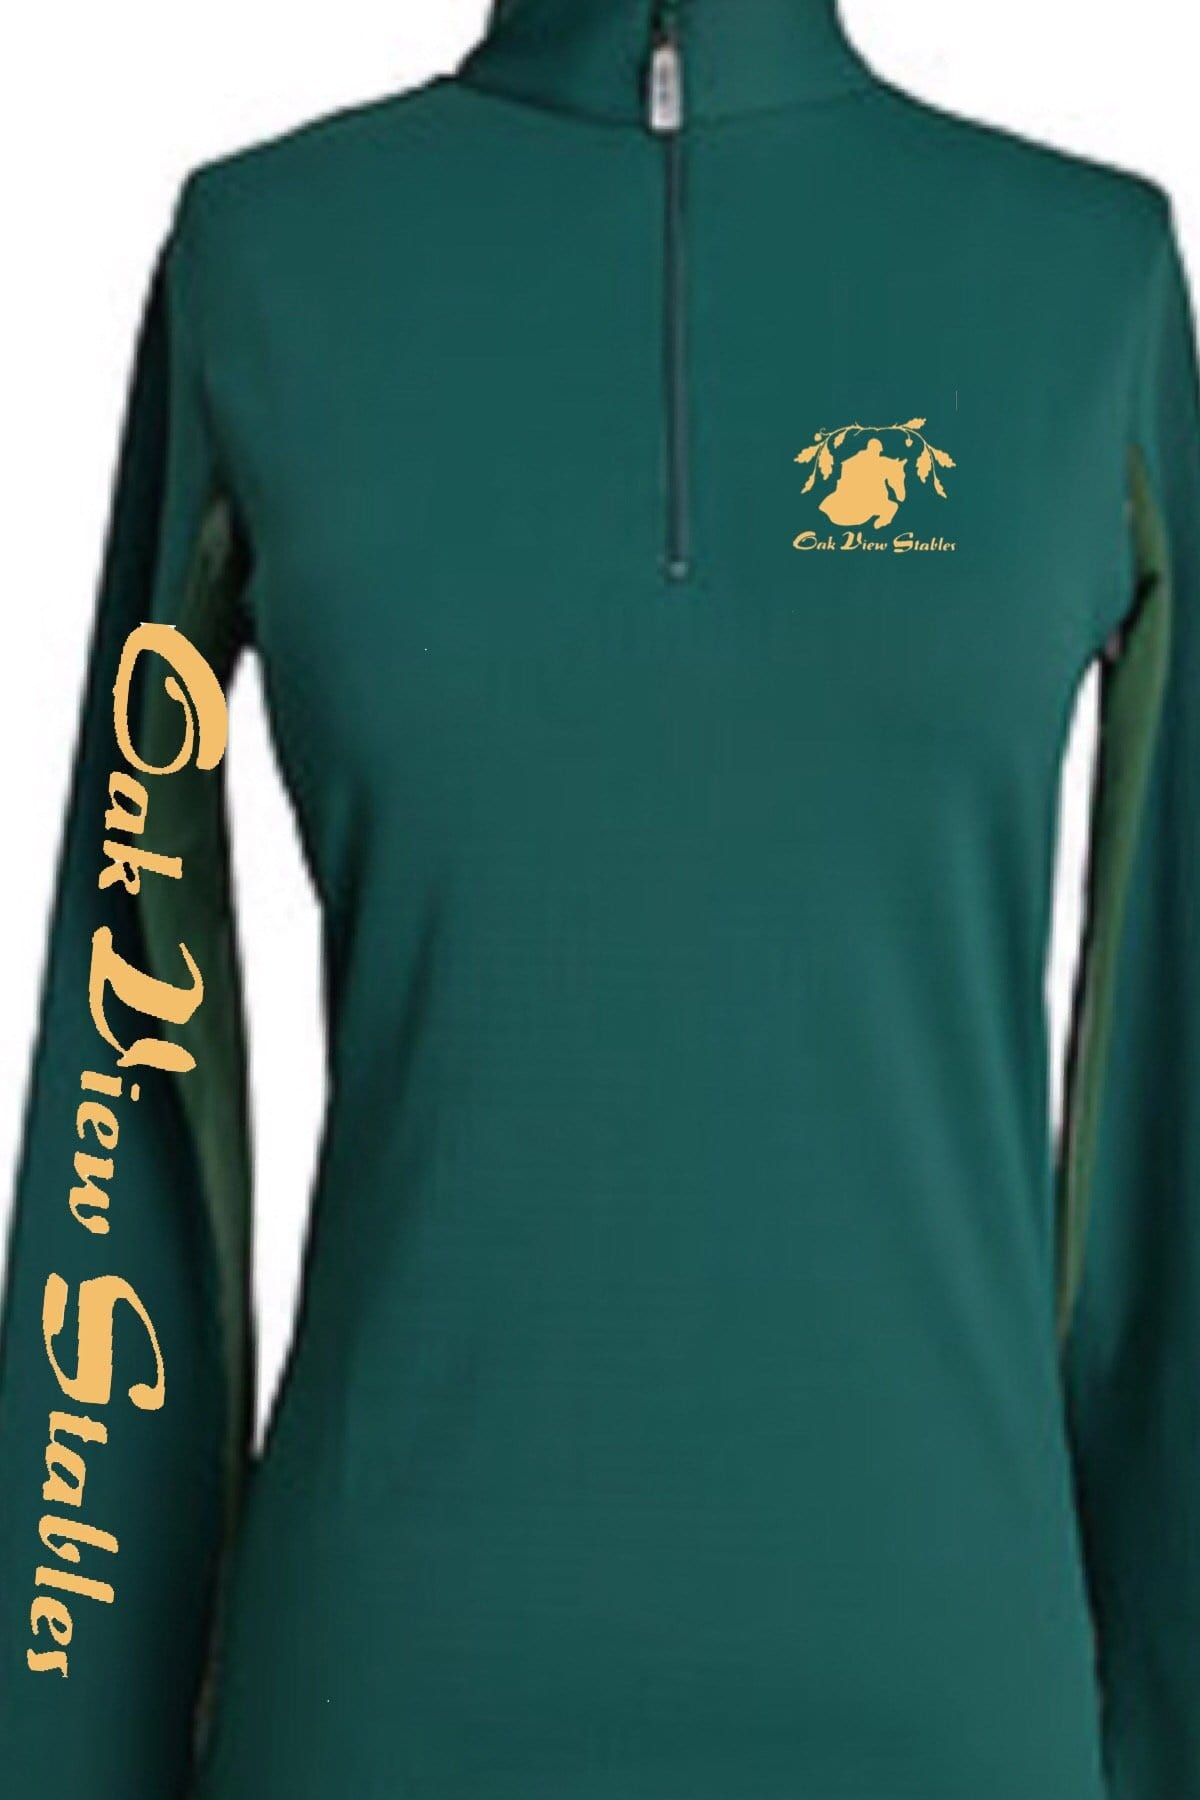 Equestrian Team Apparel Custom Team Shirts Youth / White Oak View Stables equestrian team apparel online tack store mobile tack store custom farm apparel custom show stable clothing equestrian lifestyle horse show clothing riding clothes horses equestrian tack store